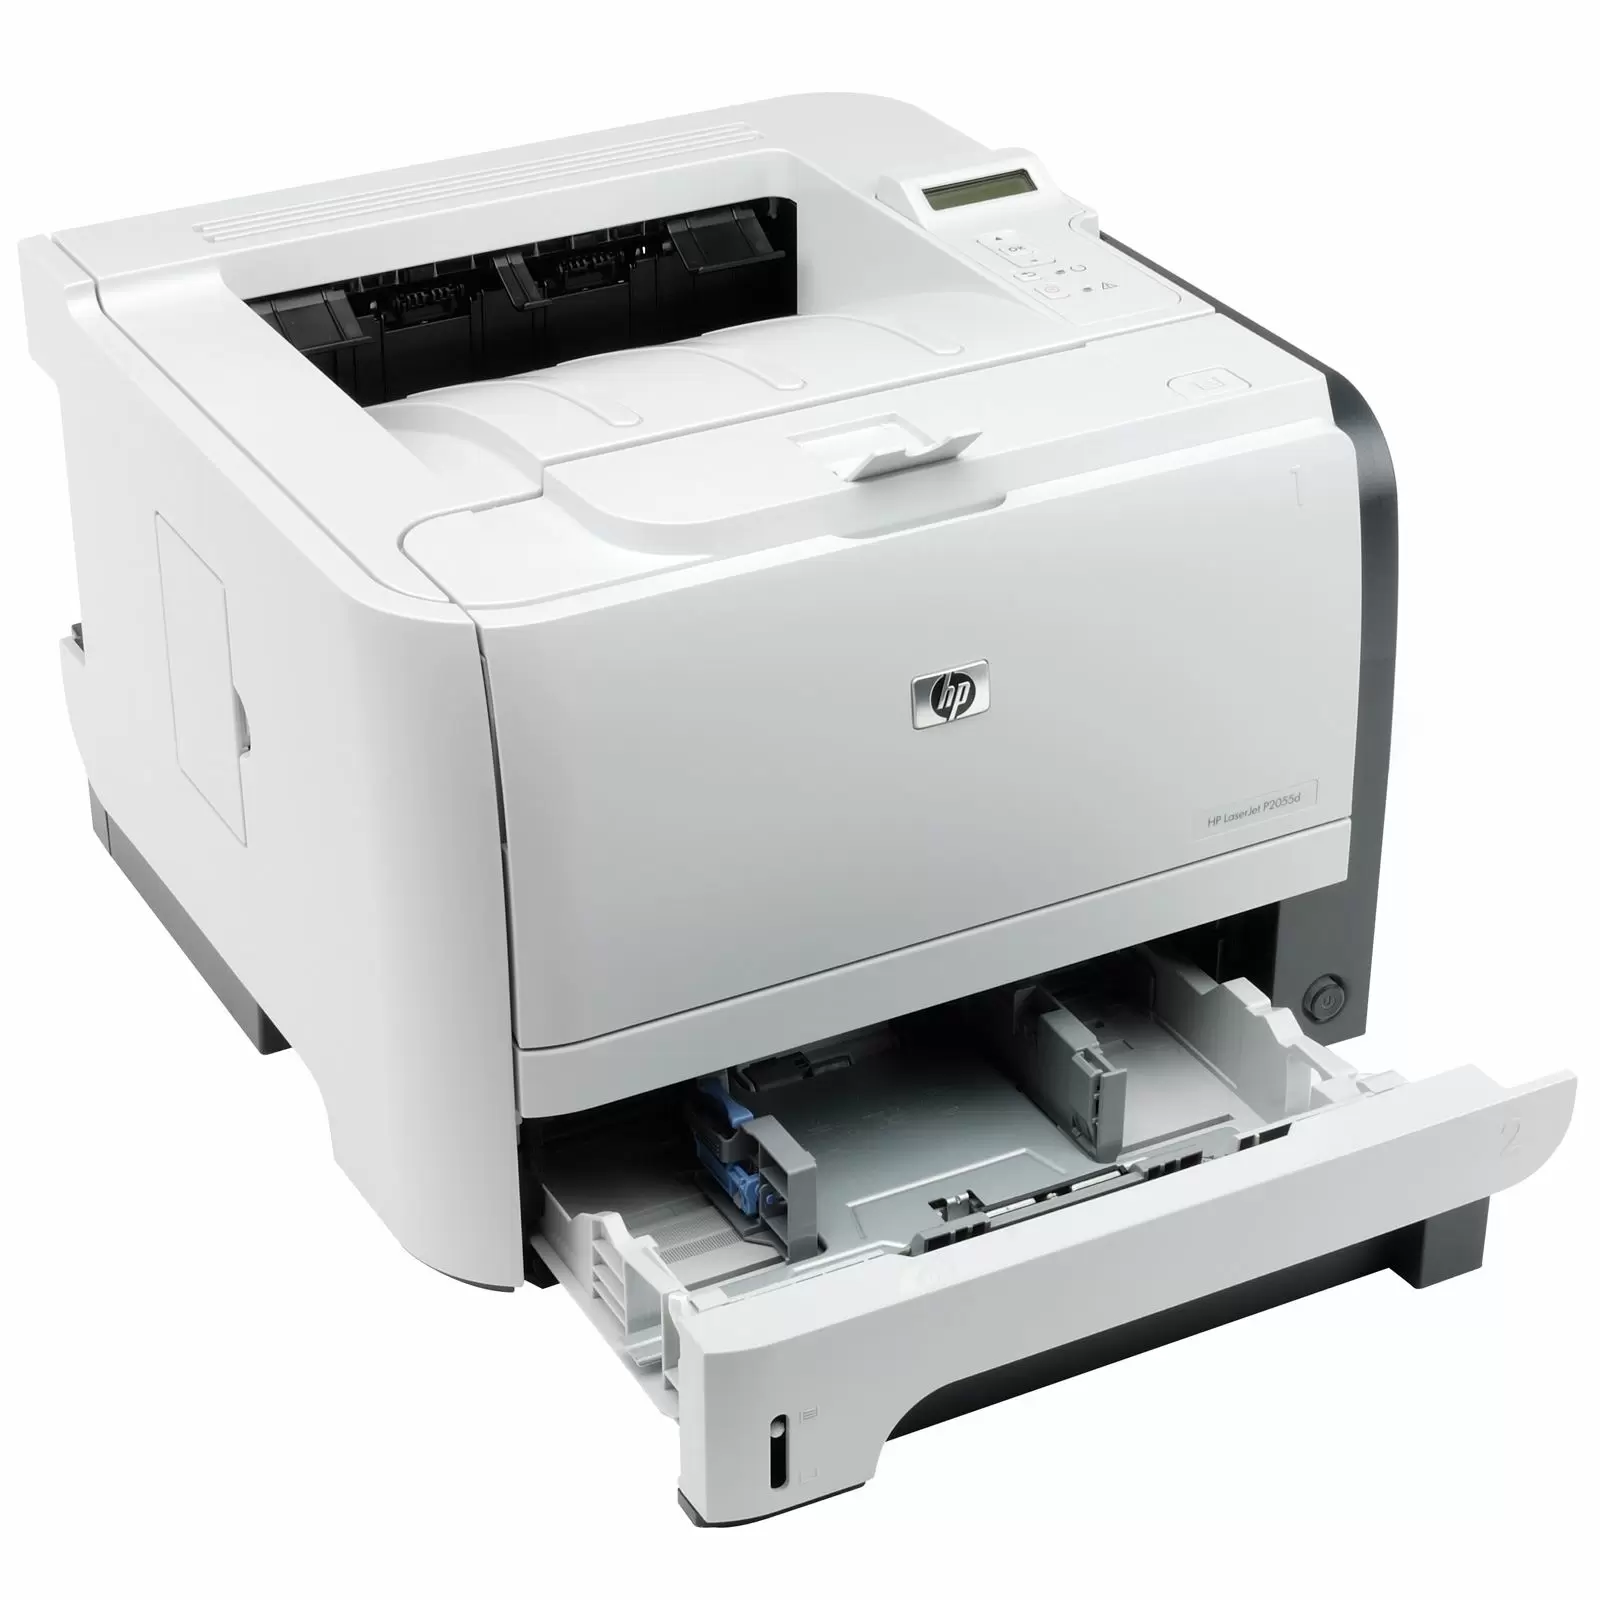 HP LaserJet P2055d Price in Pakistan, Specifications, Features, Reviews